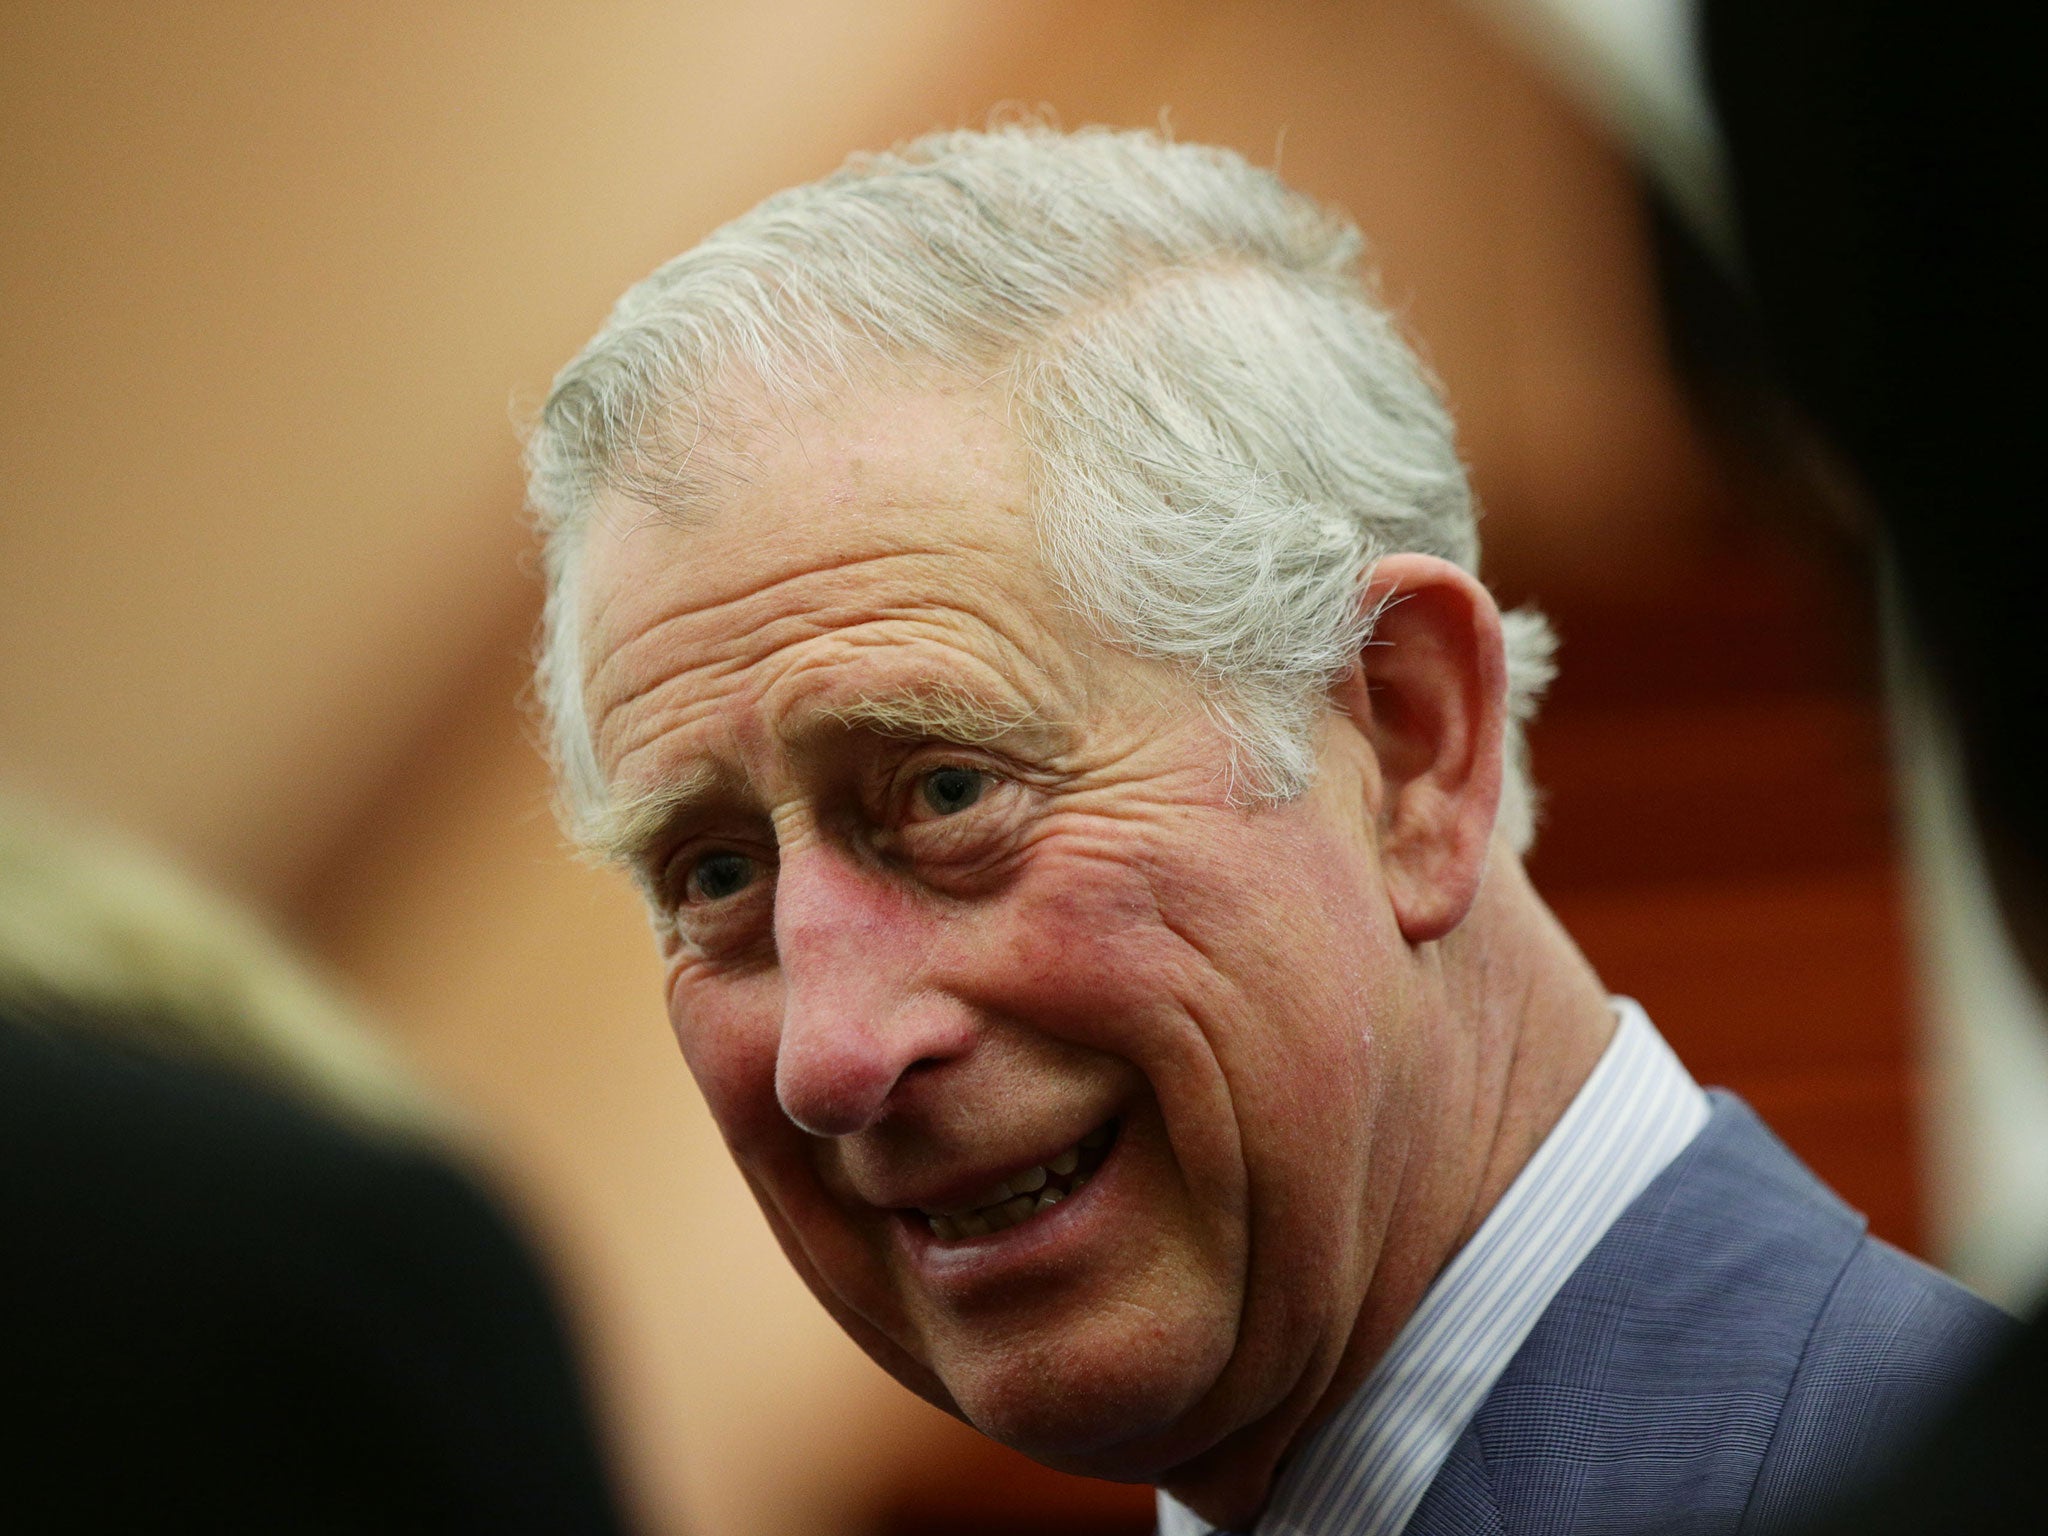 The Prince of Wales spoke at the Global Leaders Conference on One Health and Antimicrobial Resistance